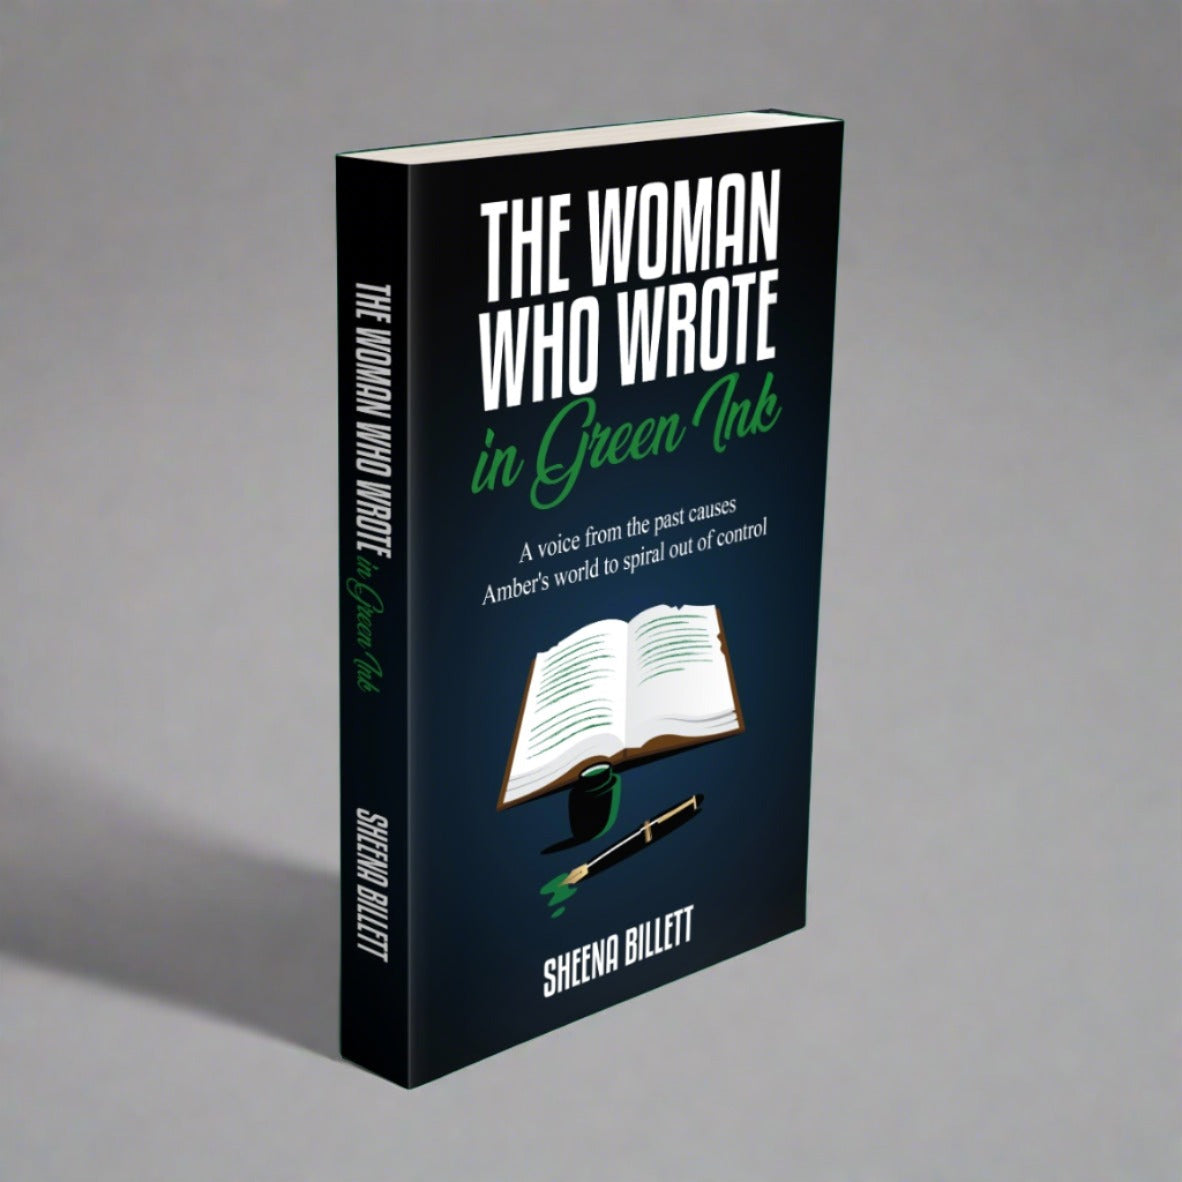 The Woman Who Wrote In Green Ink paperback